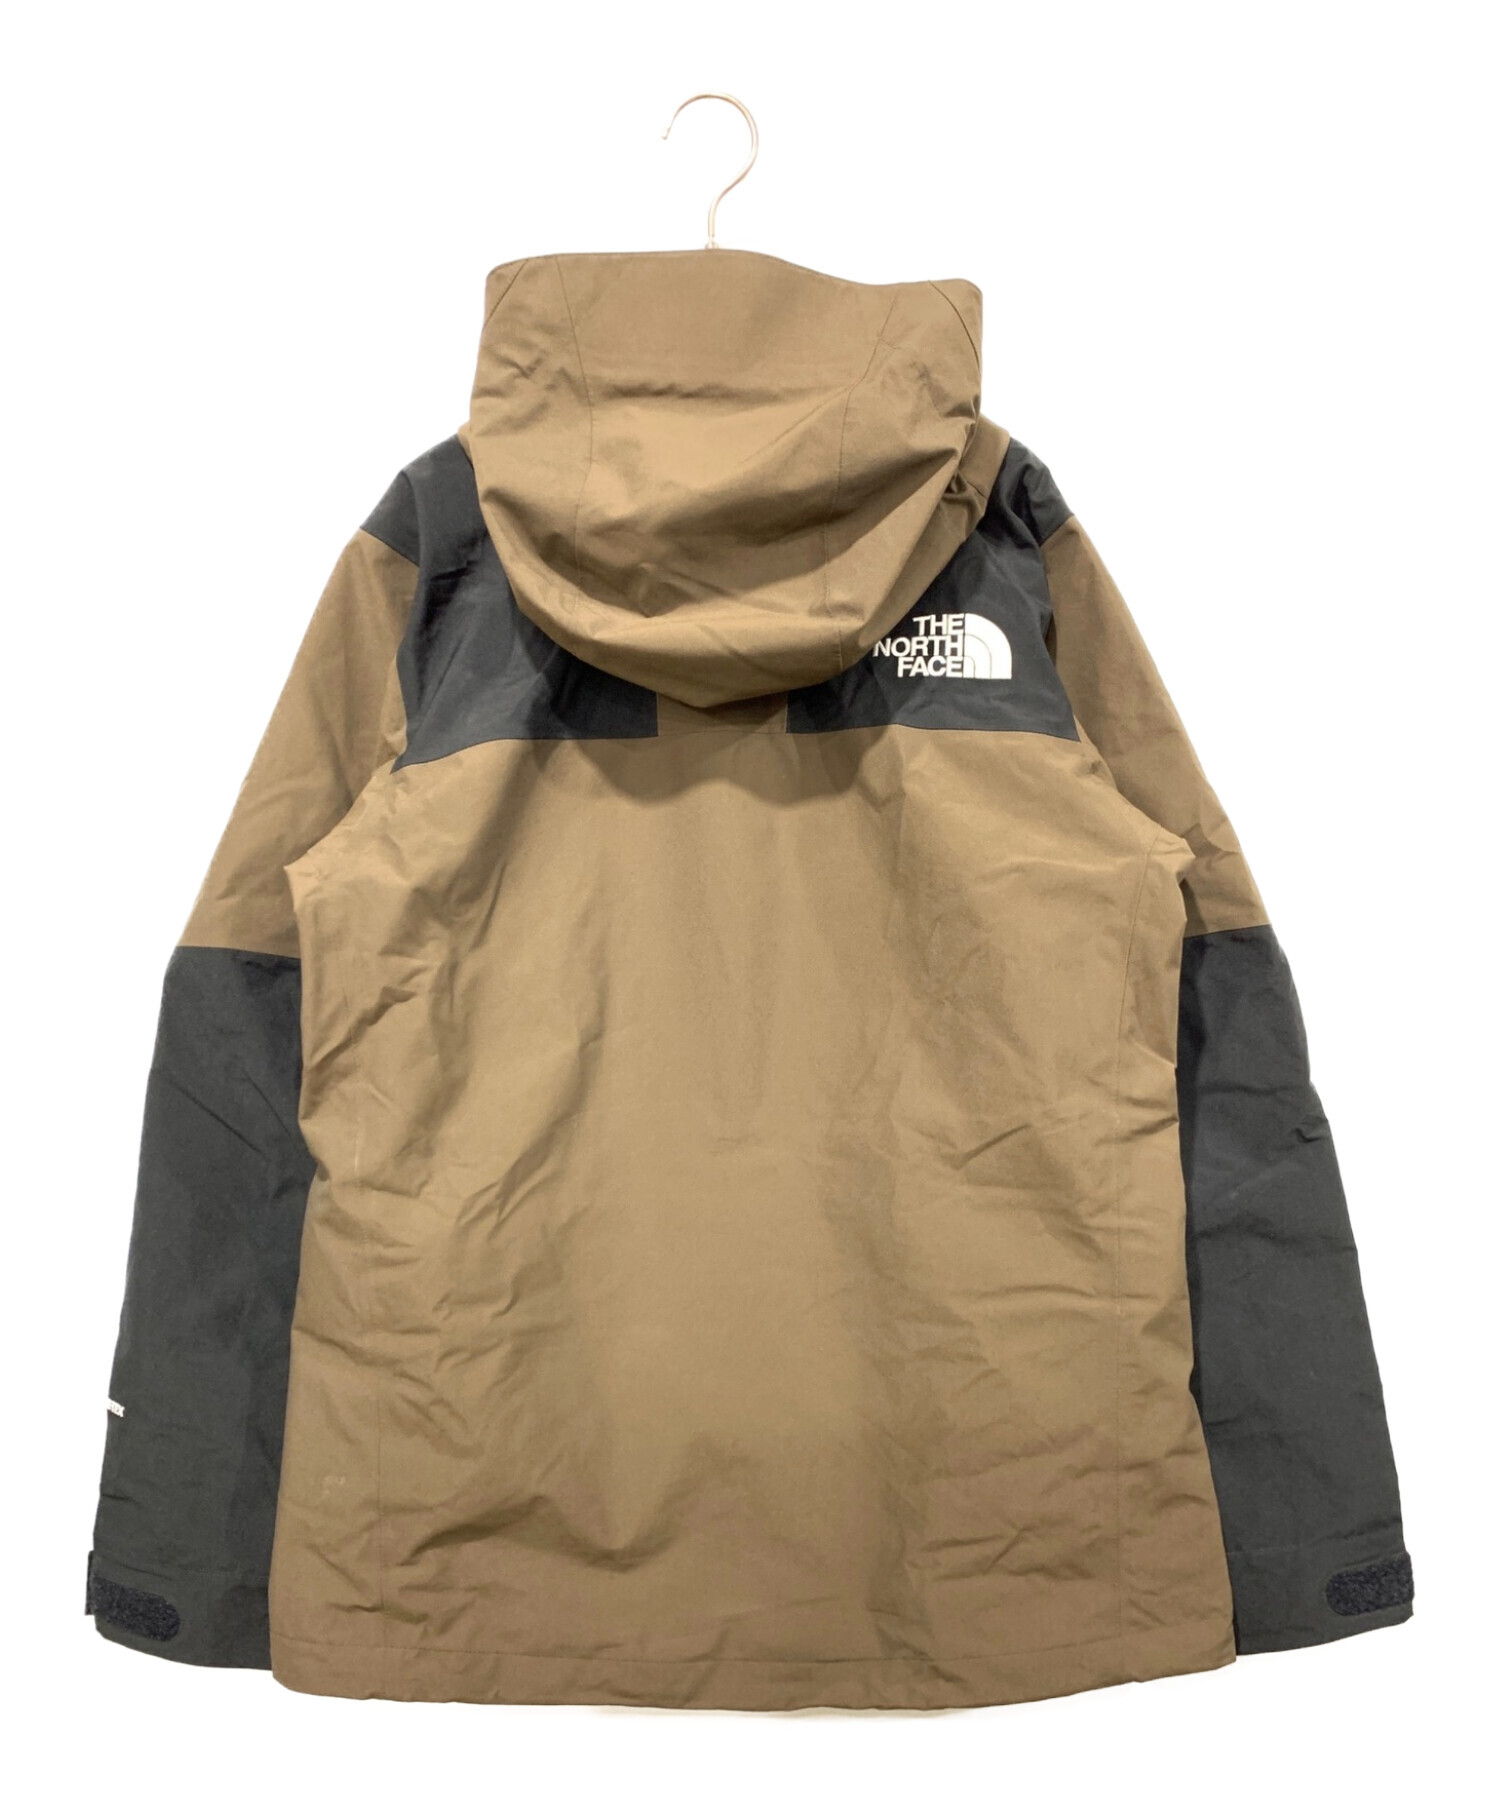 north face mountain jkt M jacket 18awNP61800カラー